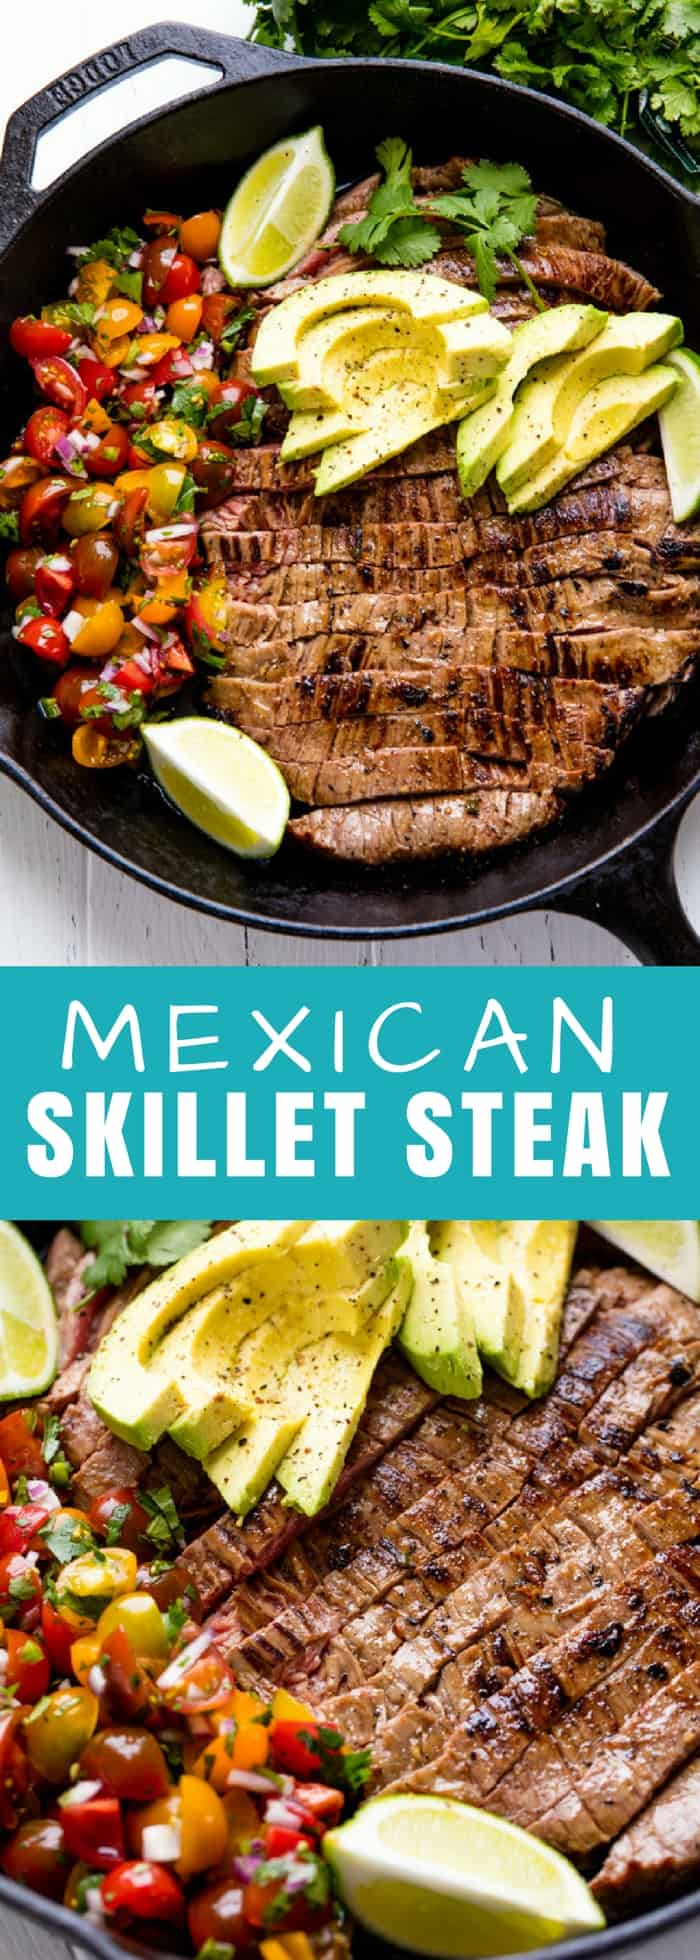 Mexican Skillet Steak is an easy dinner idea with spicy marinated steak and a quick pico de gallo. Serve it up by itself or with rice or tortillas. 